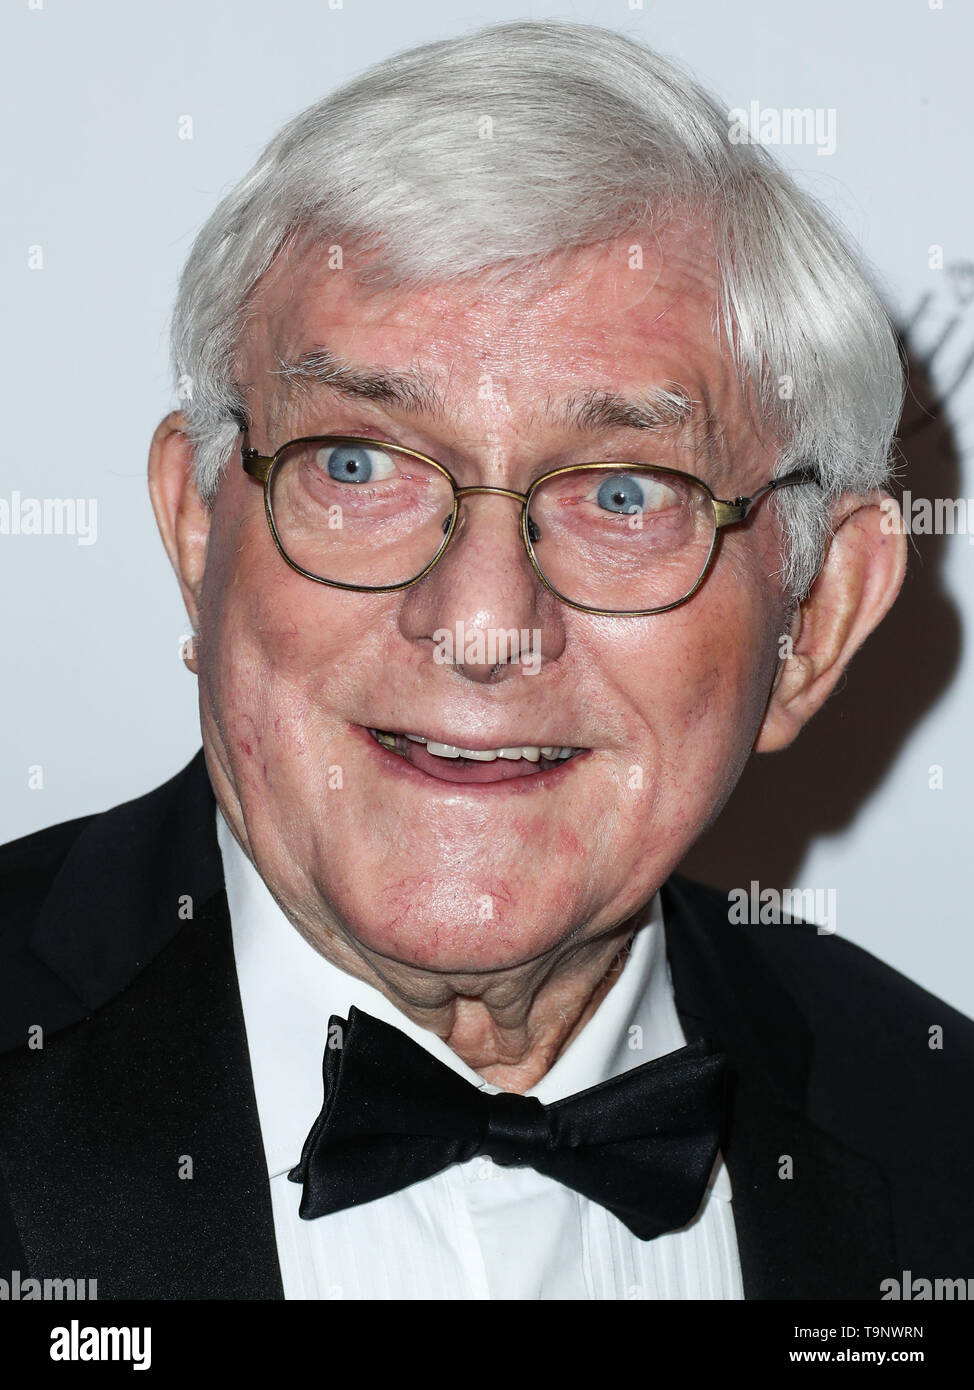 BEVERLY HILLS, LOS ANGELES, CA, USA - MAY 19: Phil Donahue arrives at the 2019 American Icon Awards held at the Beverly Wilshire Four Seasons Hotel on May 19, 2019 in Beverly Hills, Los Angeles, California, United States. (Photo by Xavier Collin/Image Press Agency) Stock Photo